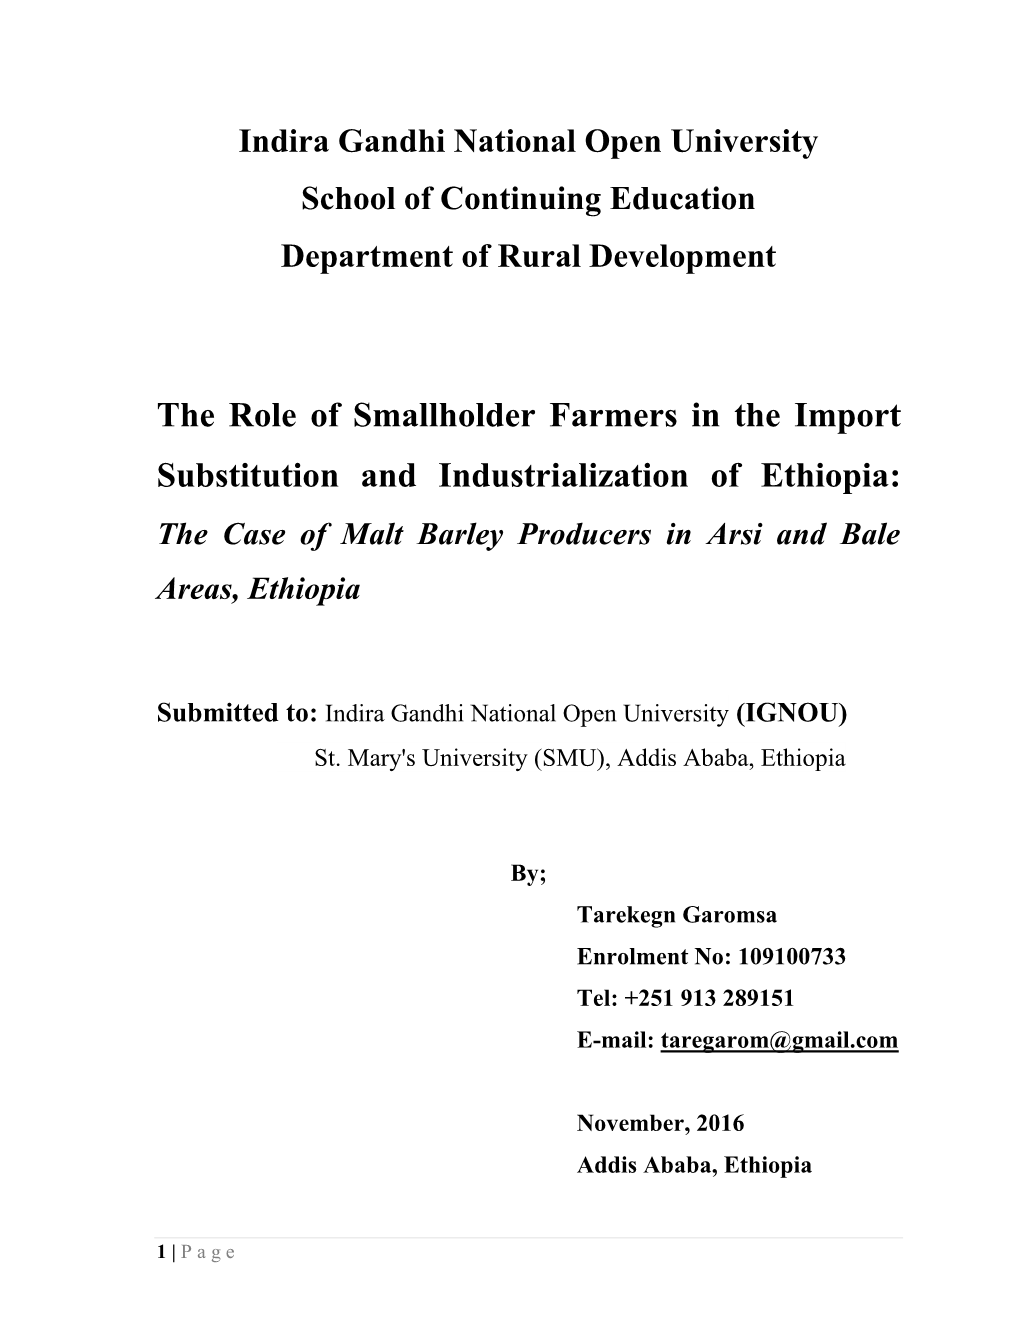 The Role of Smallholder Farmers in the Import Substitution and Industrialization of Ethiopia: the Case of Malt Barley Producers in Arsi and Bale Areas, Ethiopia